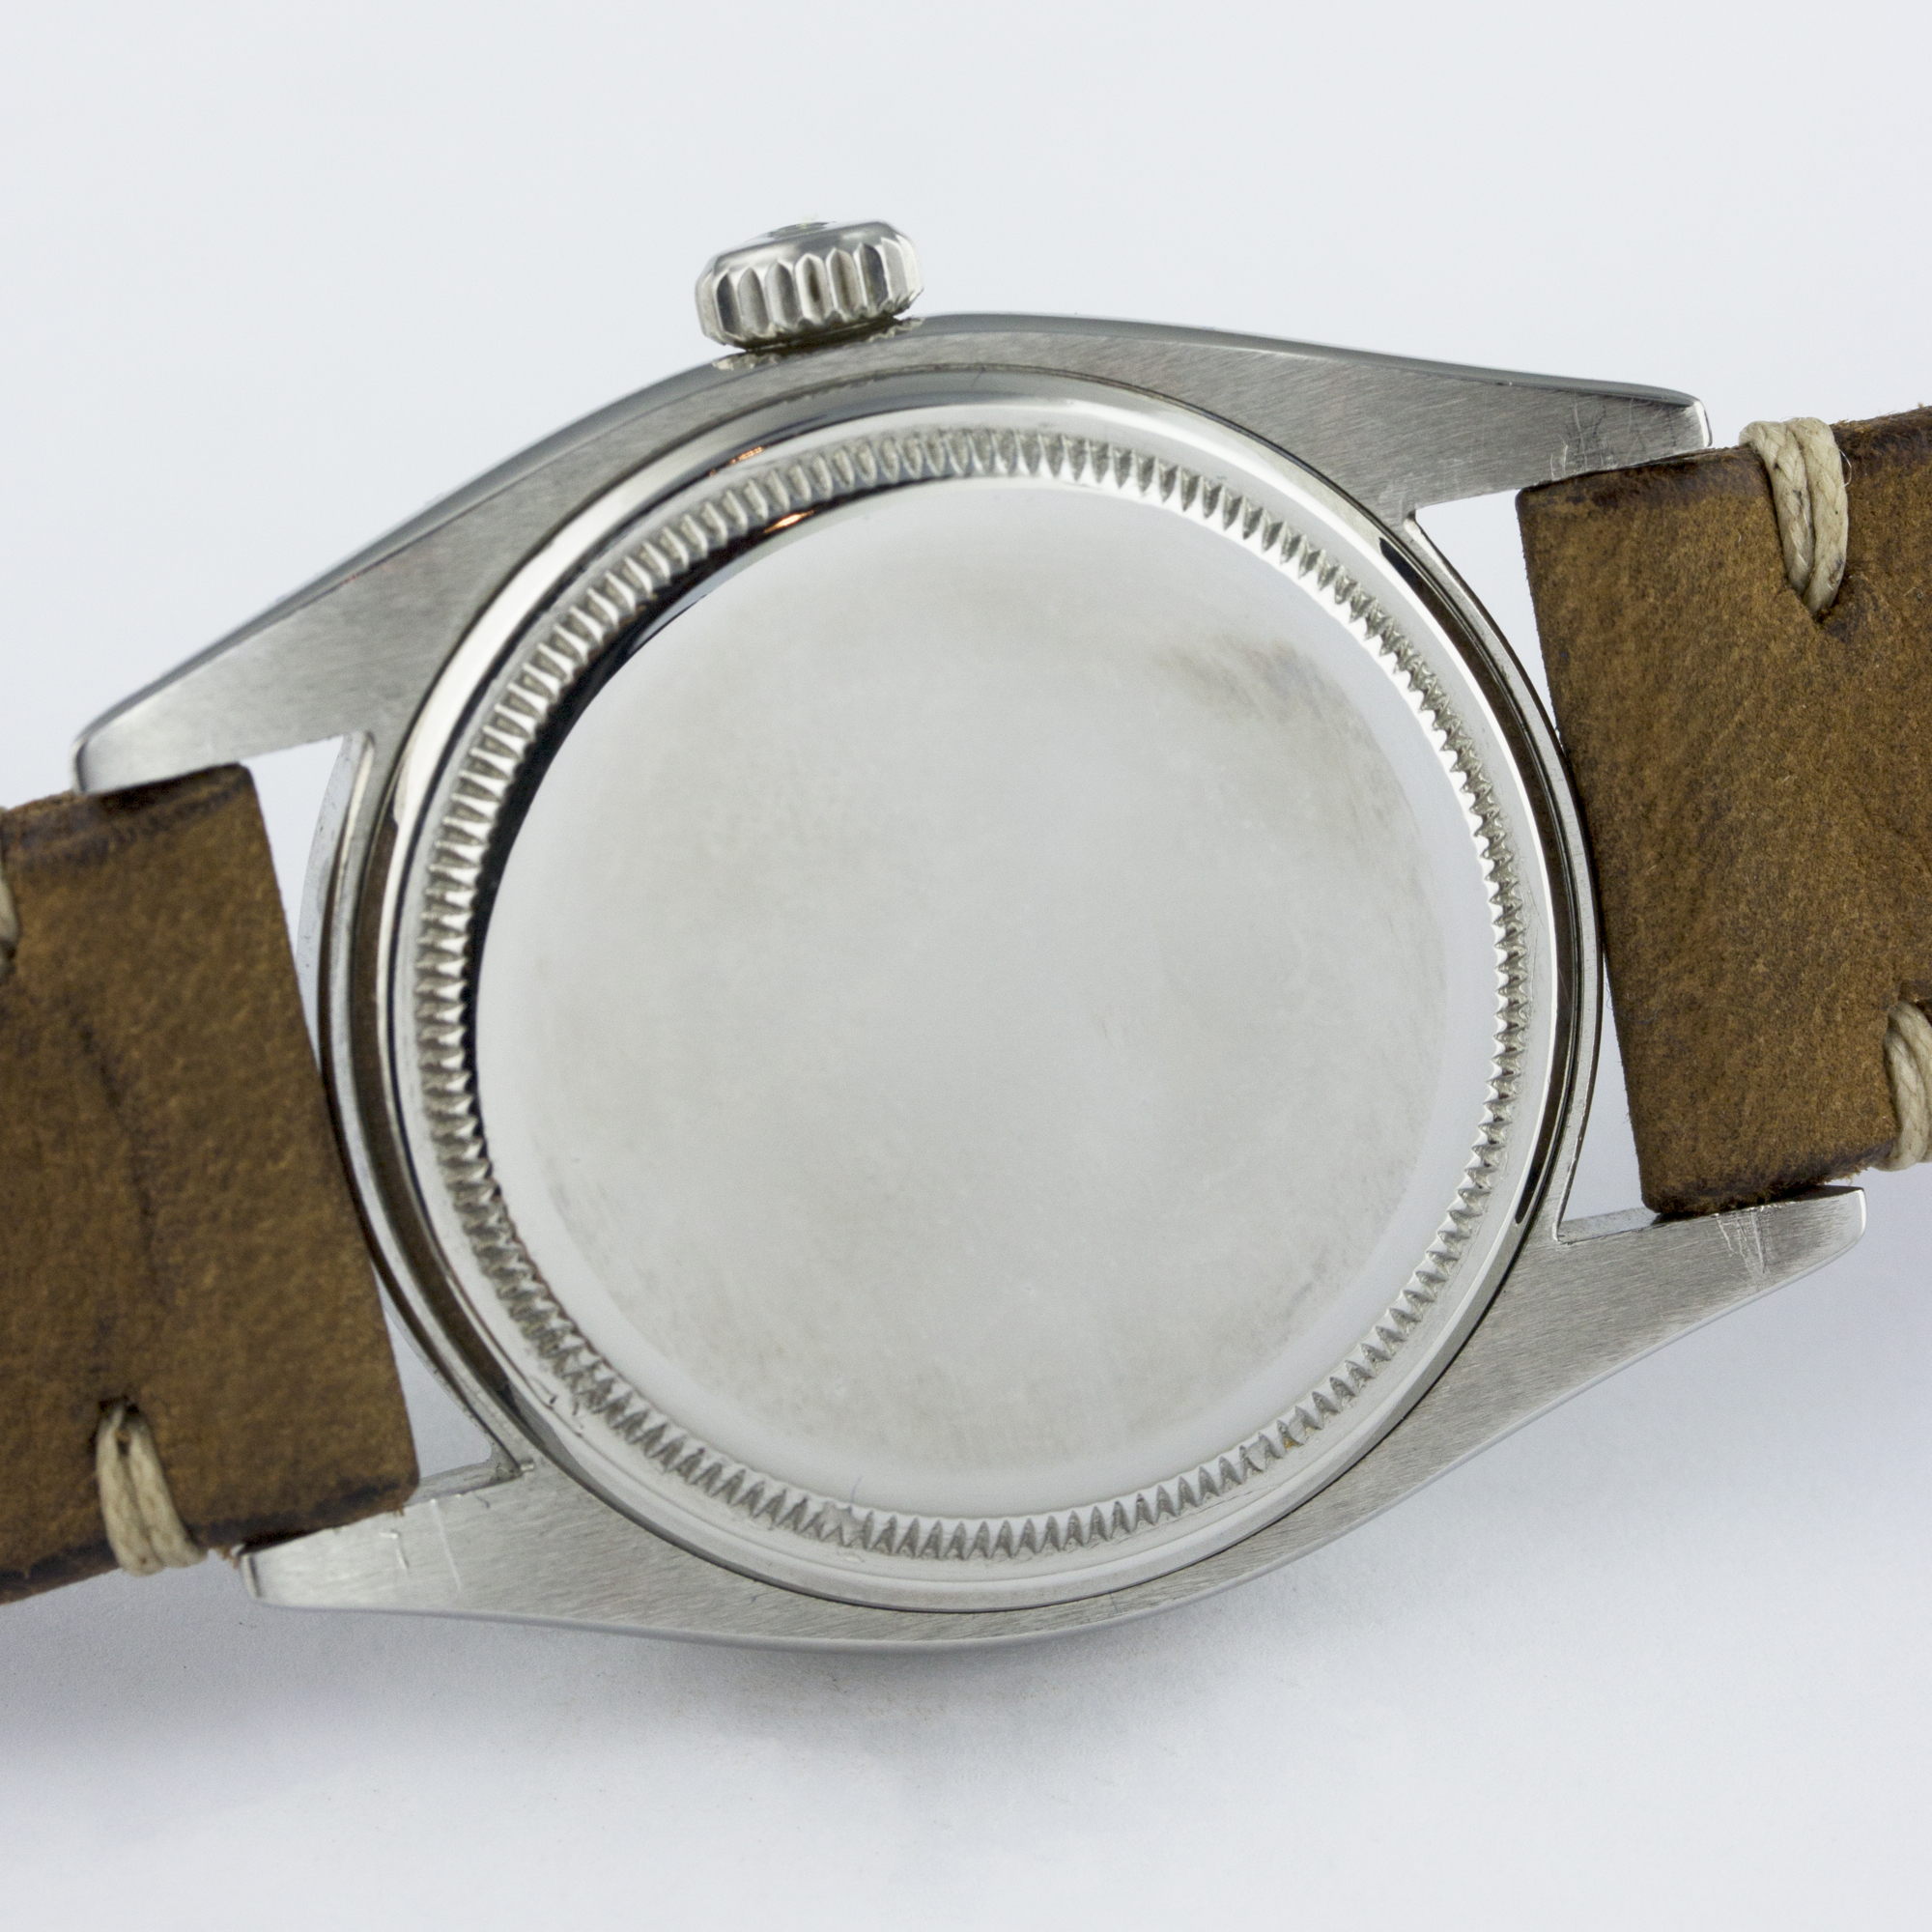 A RARE GENTLEMAN'S STAINLESS STEEL ROLEX OYSTER PERPETUAL DATEJUST WRIST WATCH CIRCA 1960, REF. 6605 - Image 7 of 9